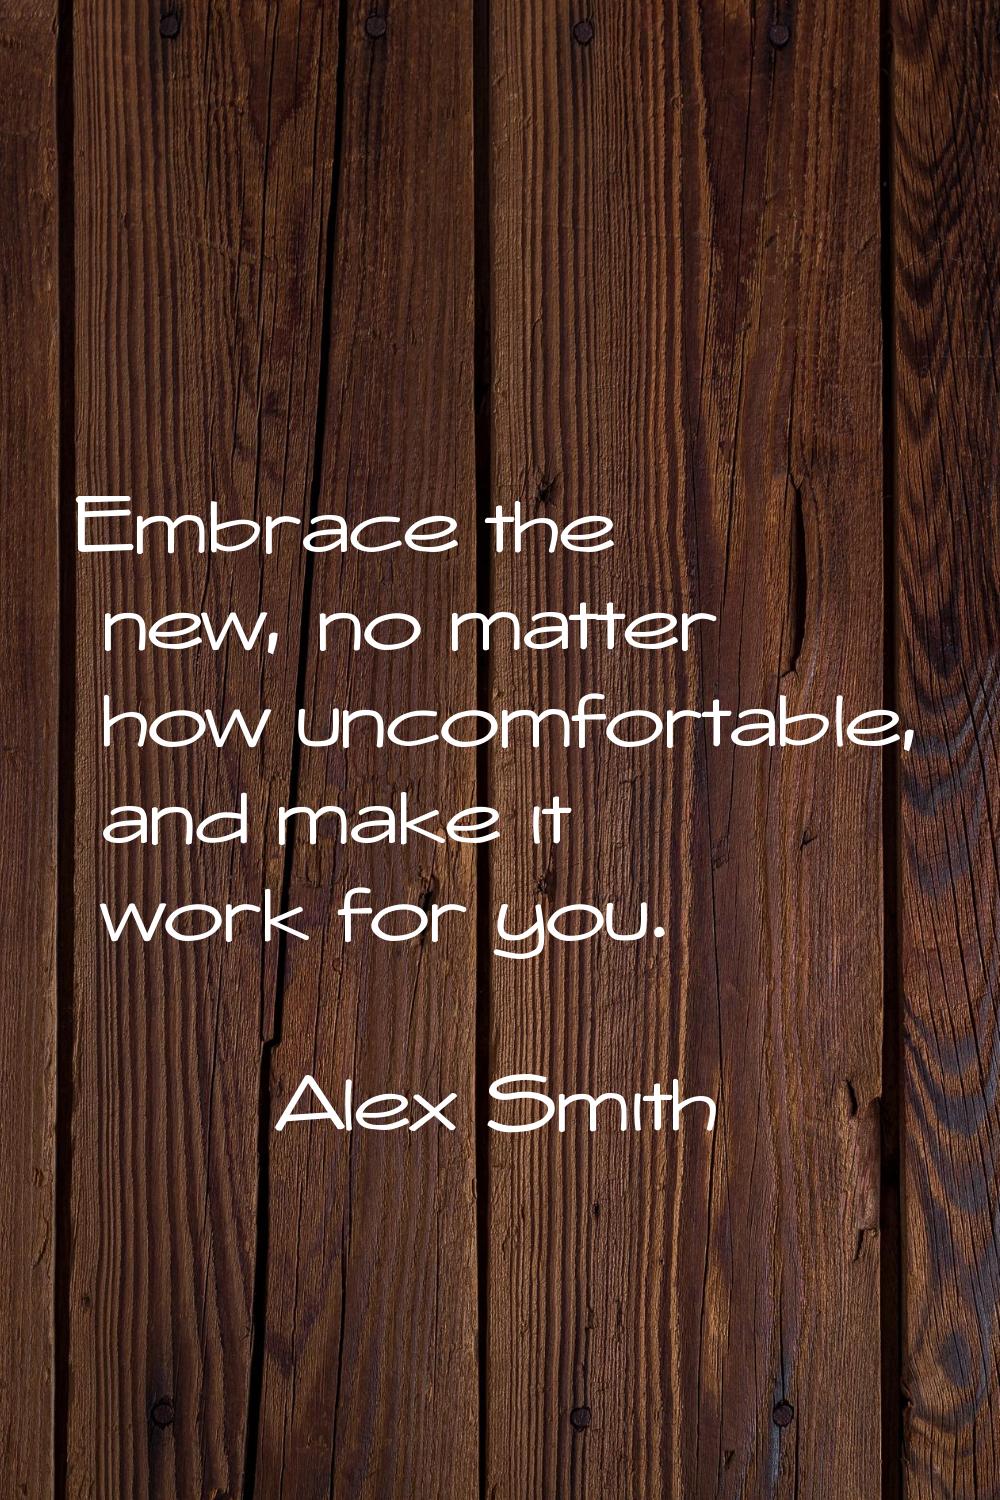 Embrace the new, no matter how uncomfortable, and make it work for you.